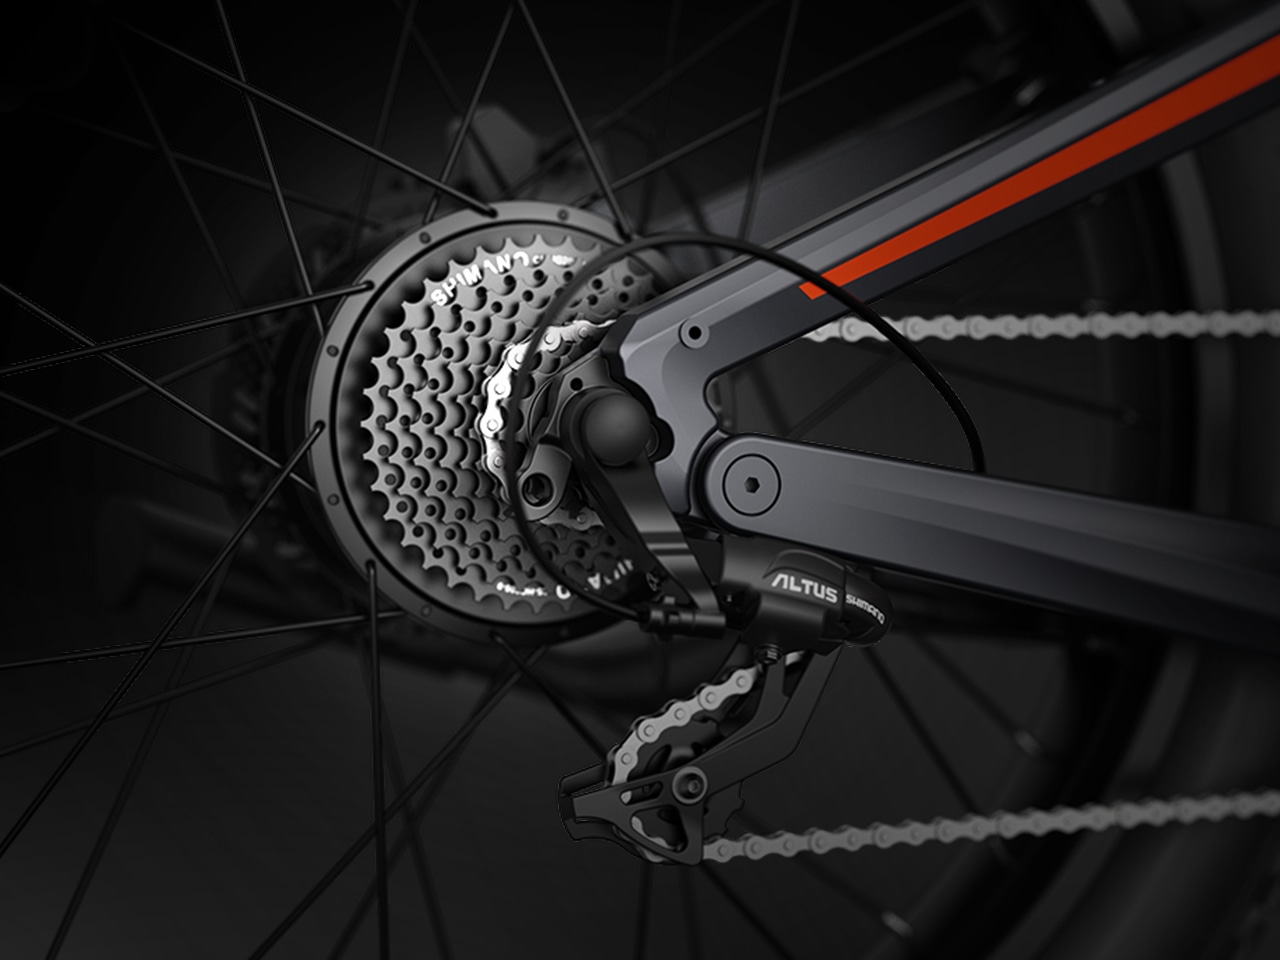 Master control with Shimano 9-speed gear shifts for seamless transitions on thrilling moves.